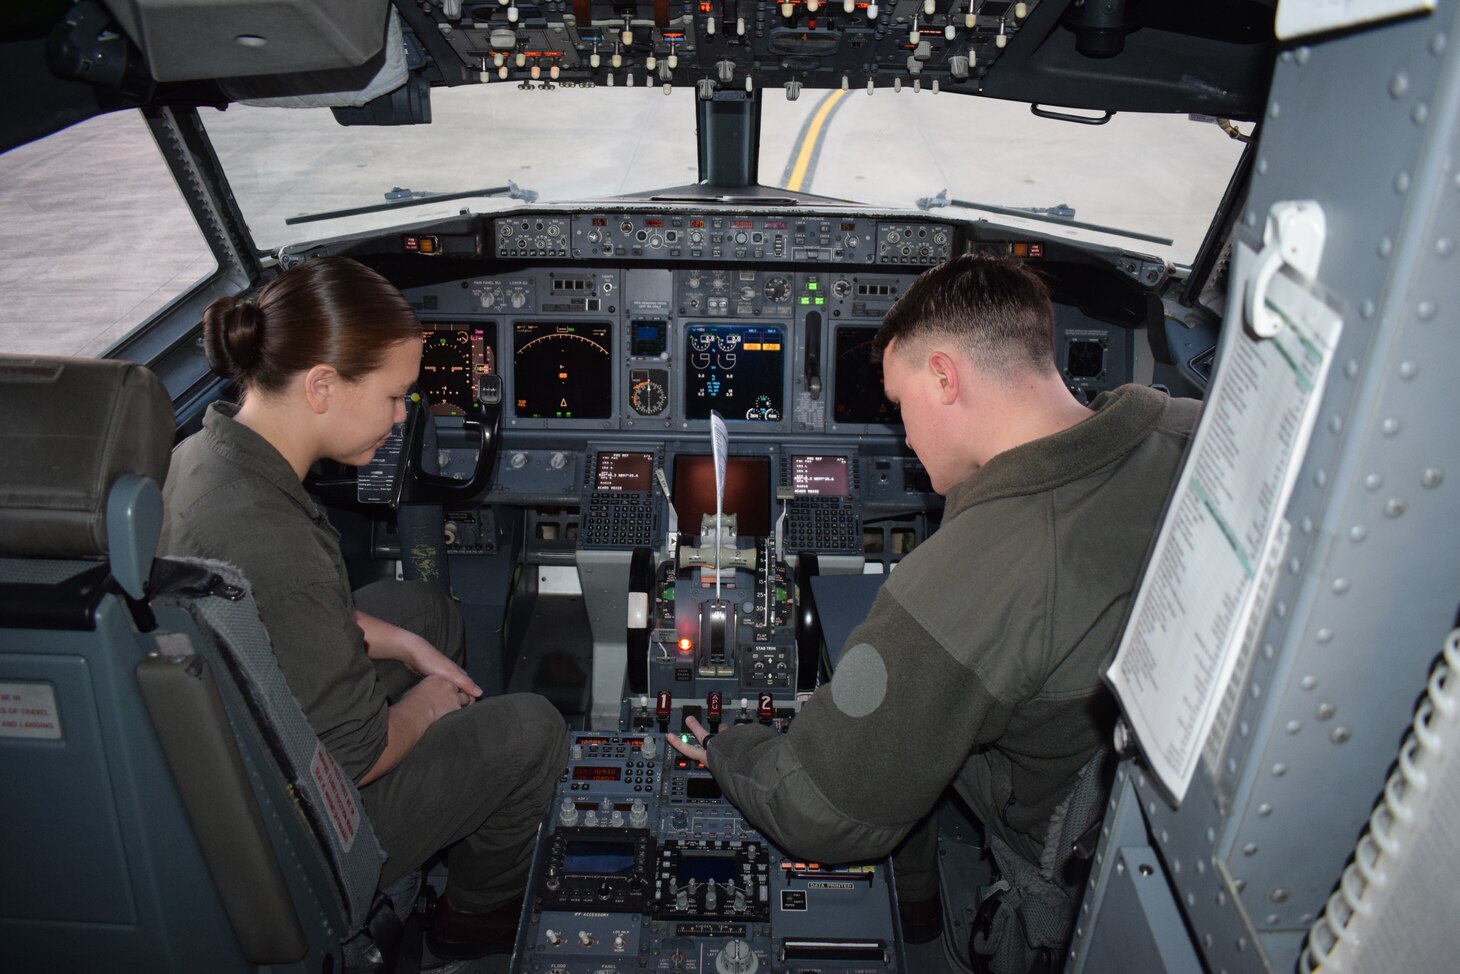 U.S. Marine Corps Staff Sgt. Song, left, a C-40A Clipper crew chief with Marine Transport Squadron 1, Marine Aircraft Group 41, Marine Forces Reserve, instructs the preflight procedures to a C-40A Crew Chief student at Naval Air Station Joint Reserve Base Fort Worth, Texas.